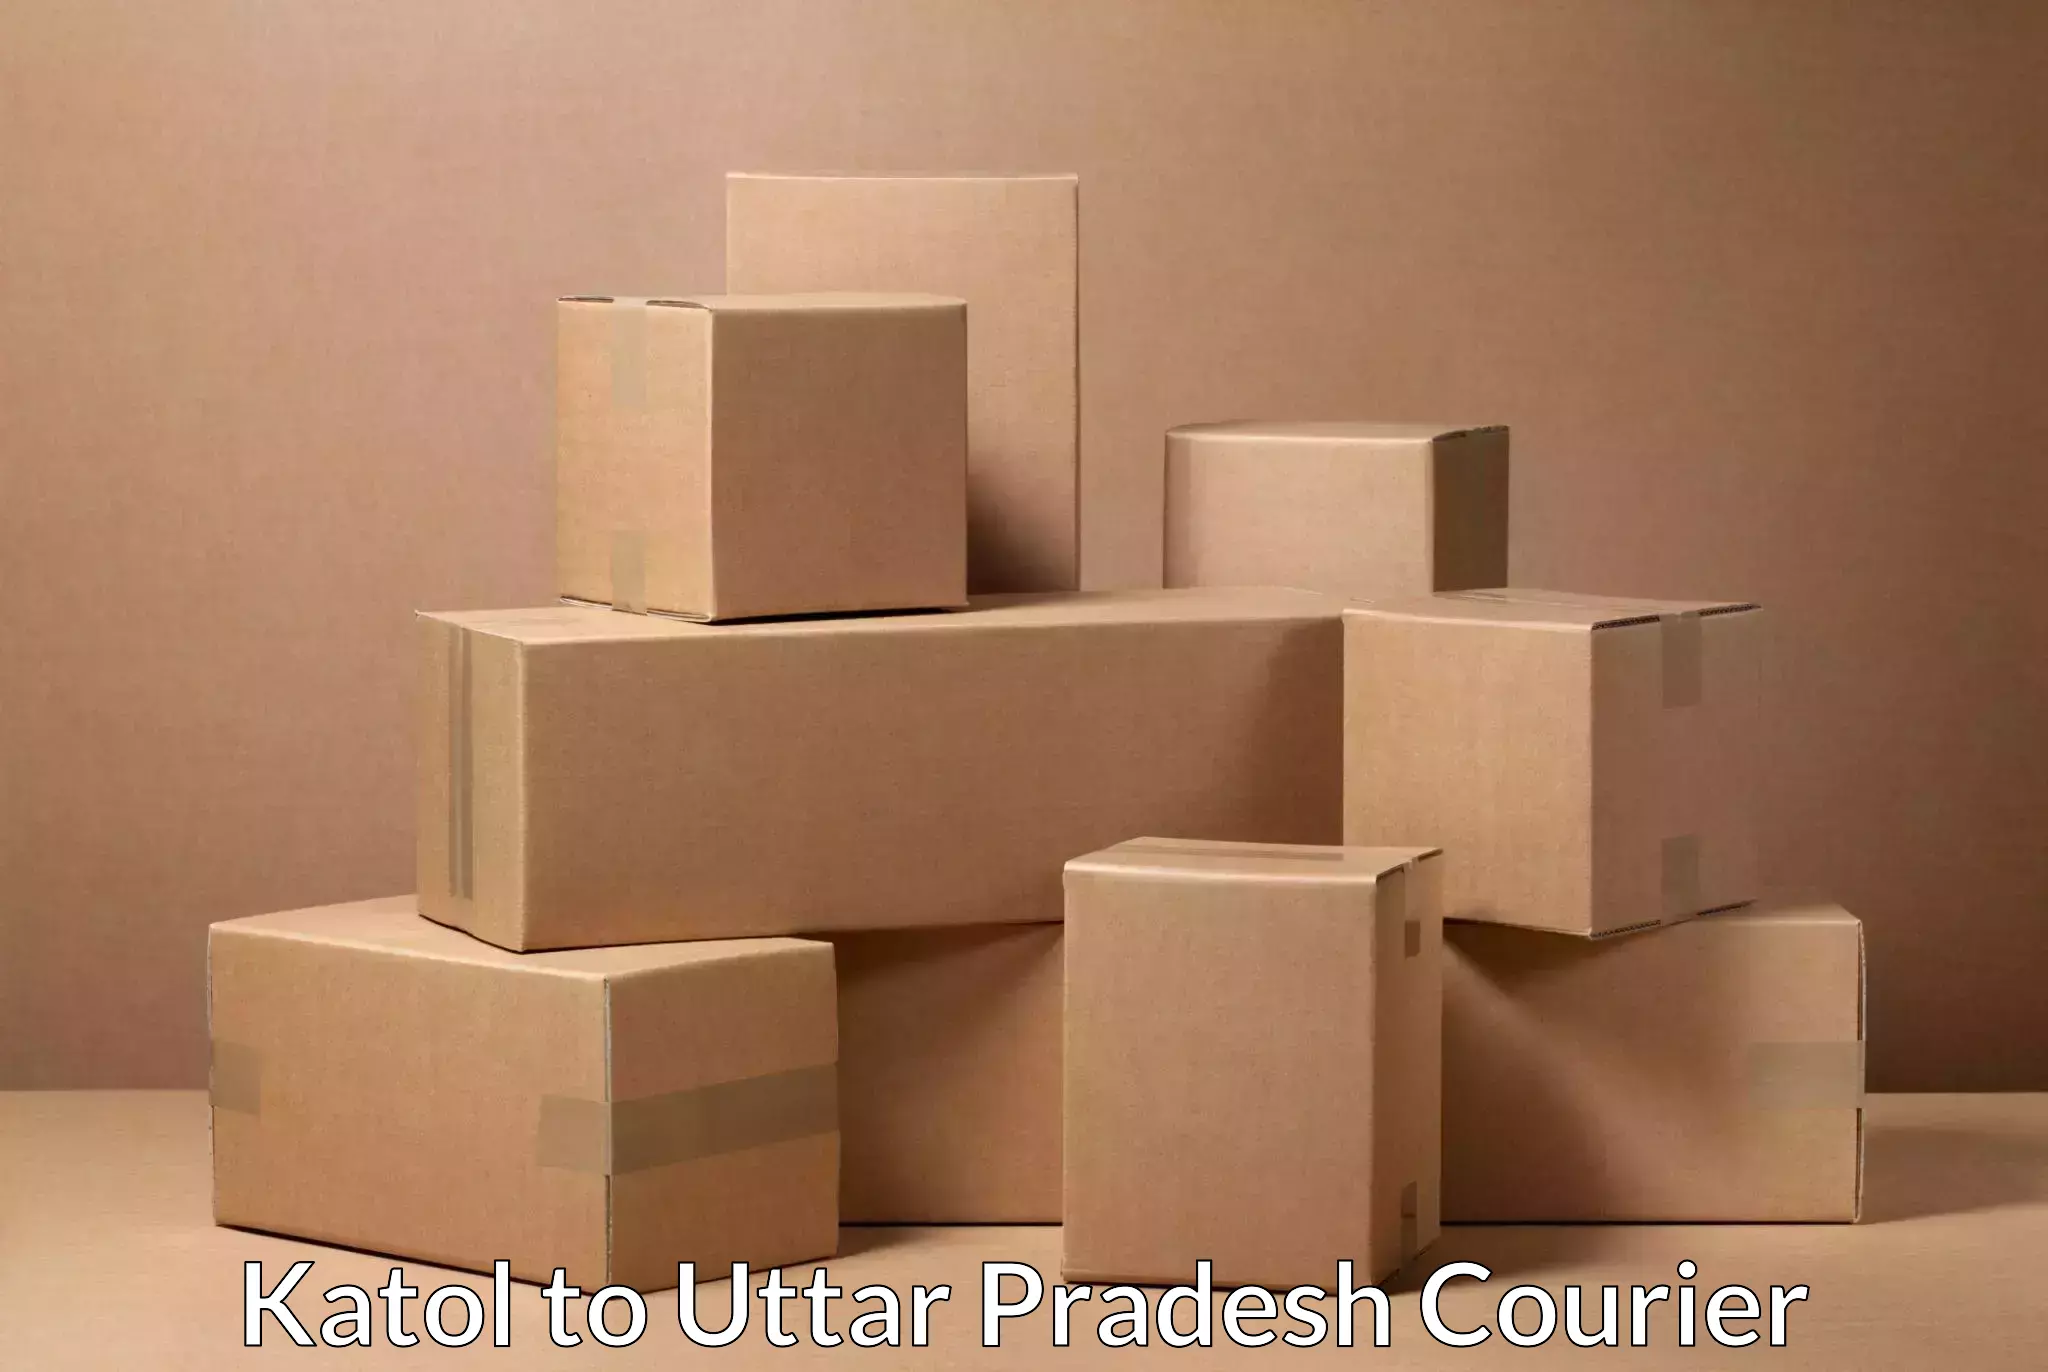 Air courier services Katol to Agra